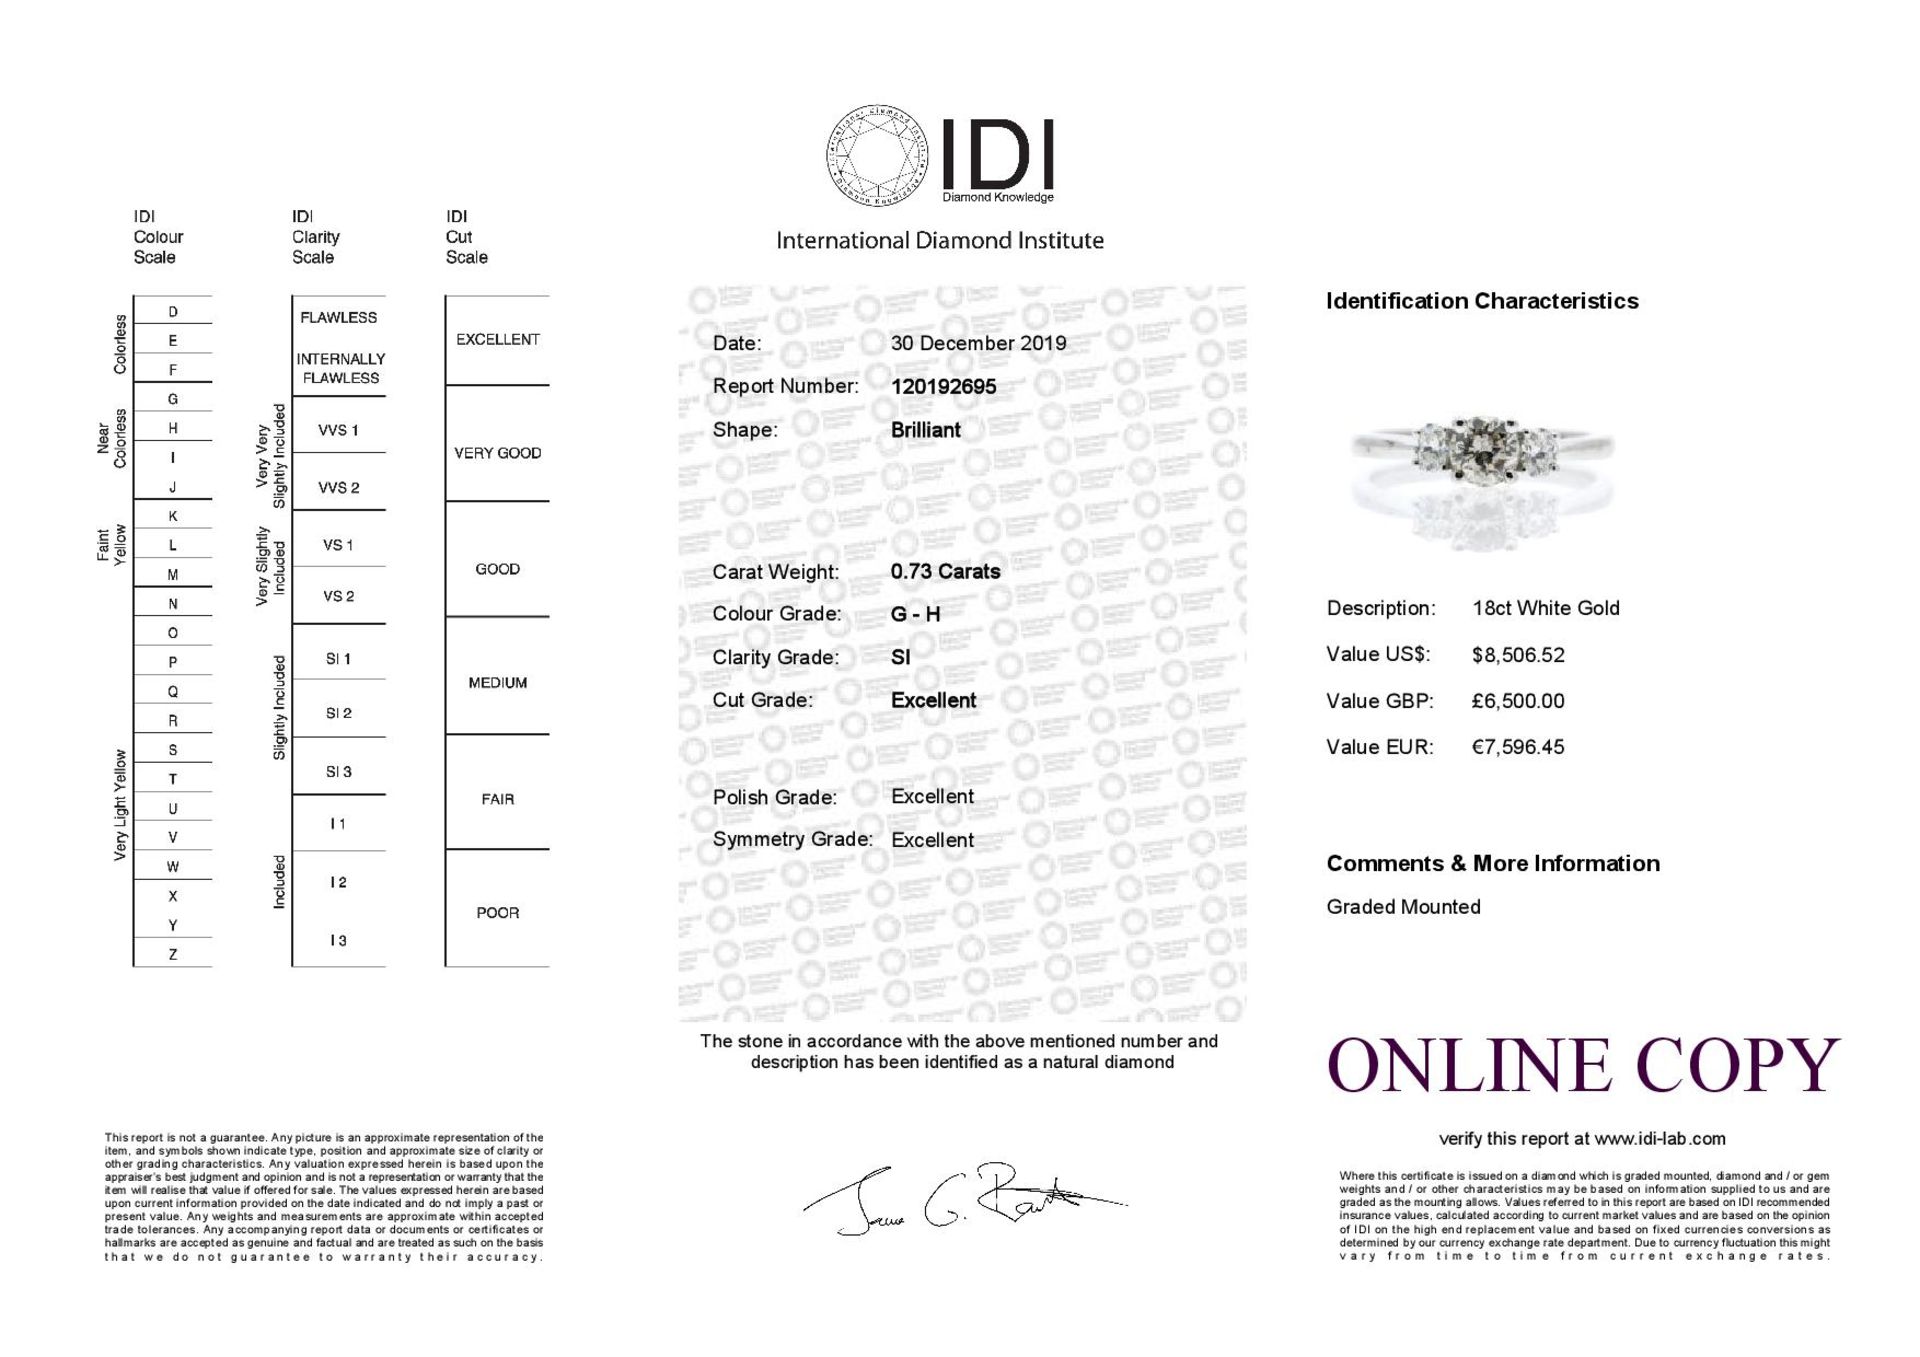 18ct White Gold Three Stone Claw Set Diamond Ring 0.73 Carats - Valued by IDI £6,500.00 - 18ct White - Image 5 of 5